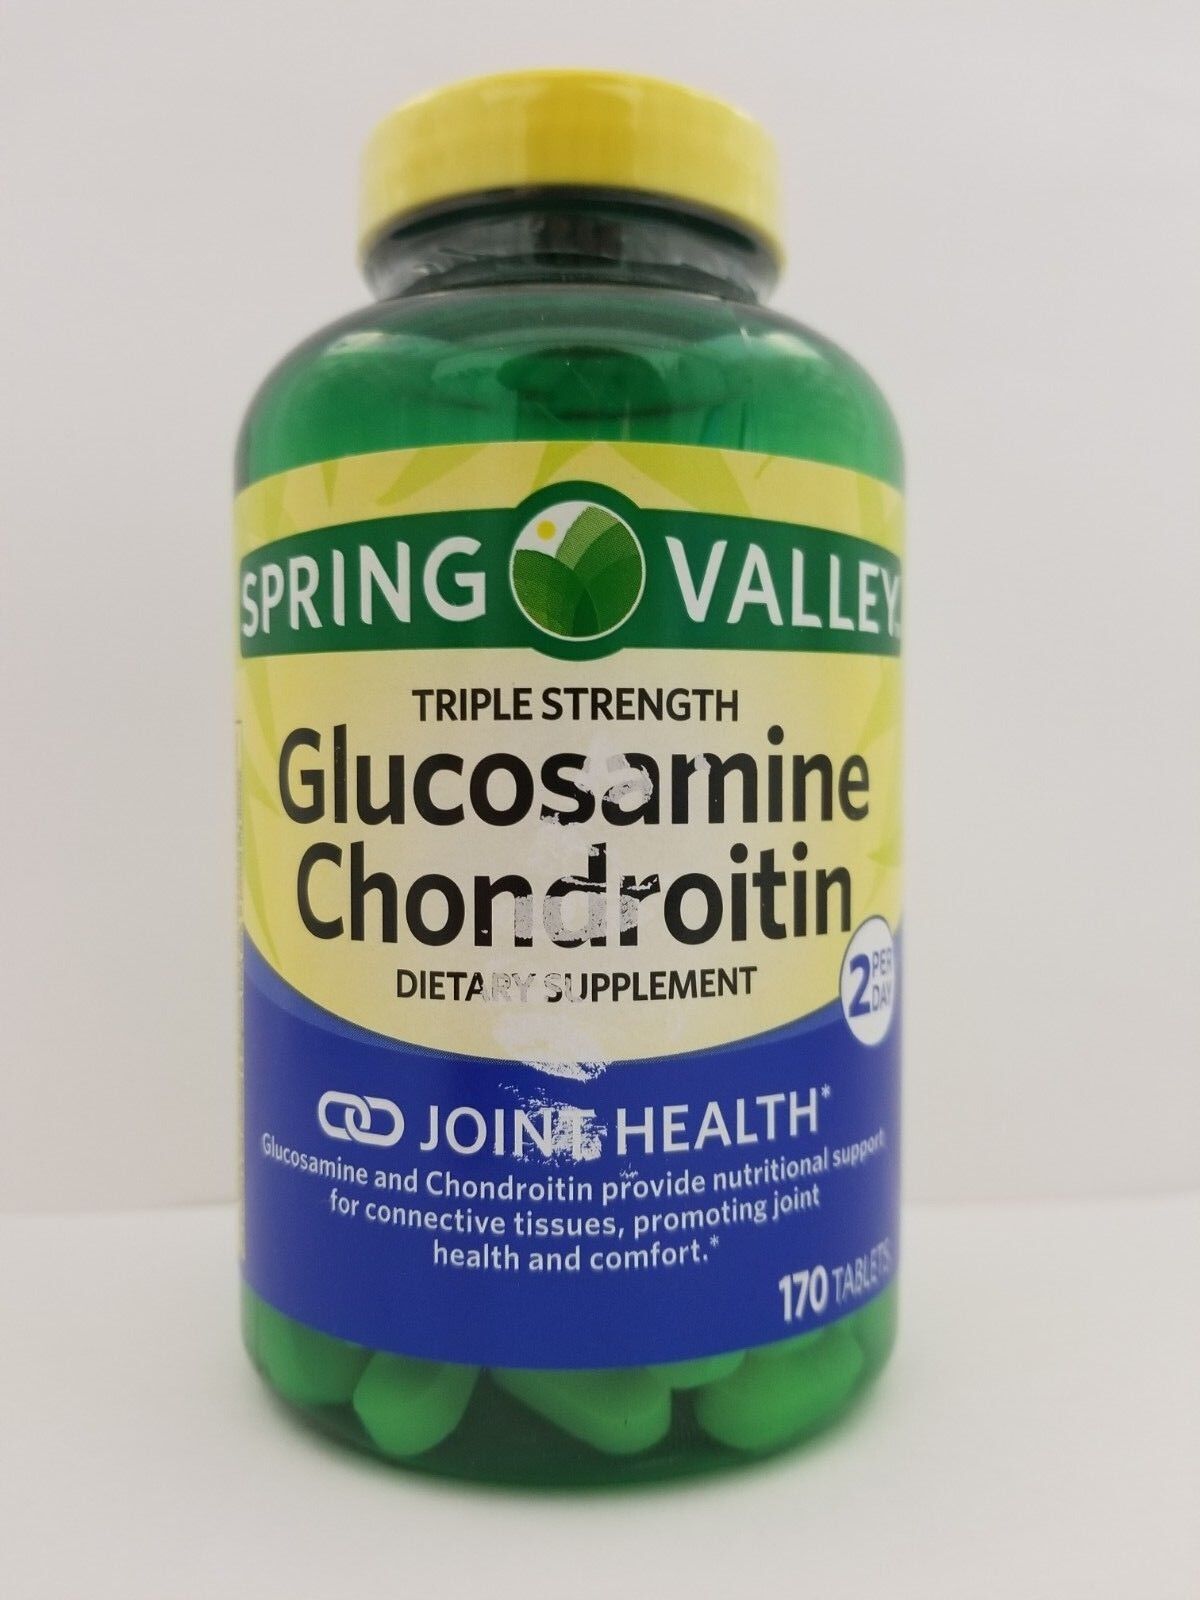 Spring Valley Triple Strength Glucosamine Chondroitin 170 Tablets 2PK Exp 9/24+ Spring Valley W3192 - фотография #2